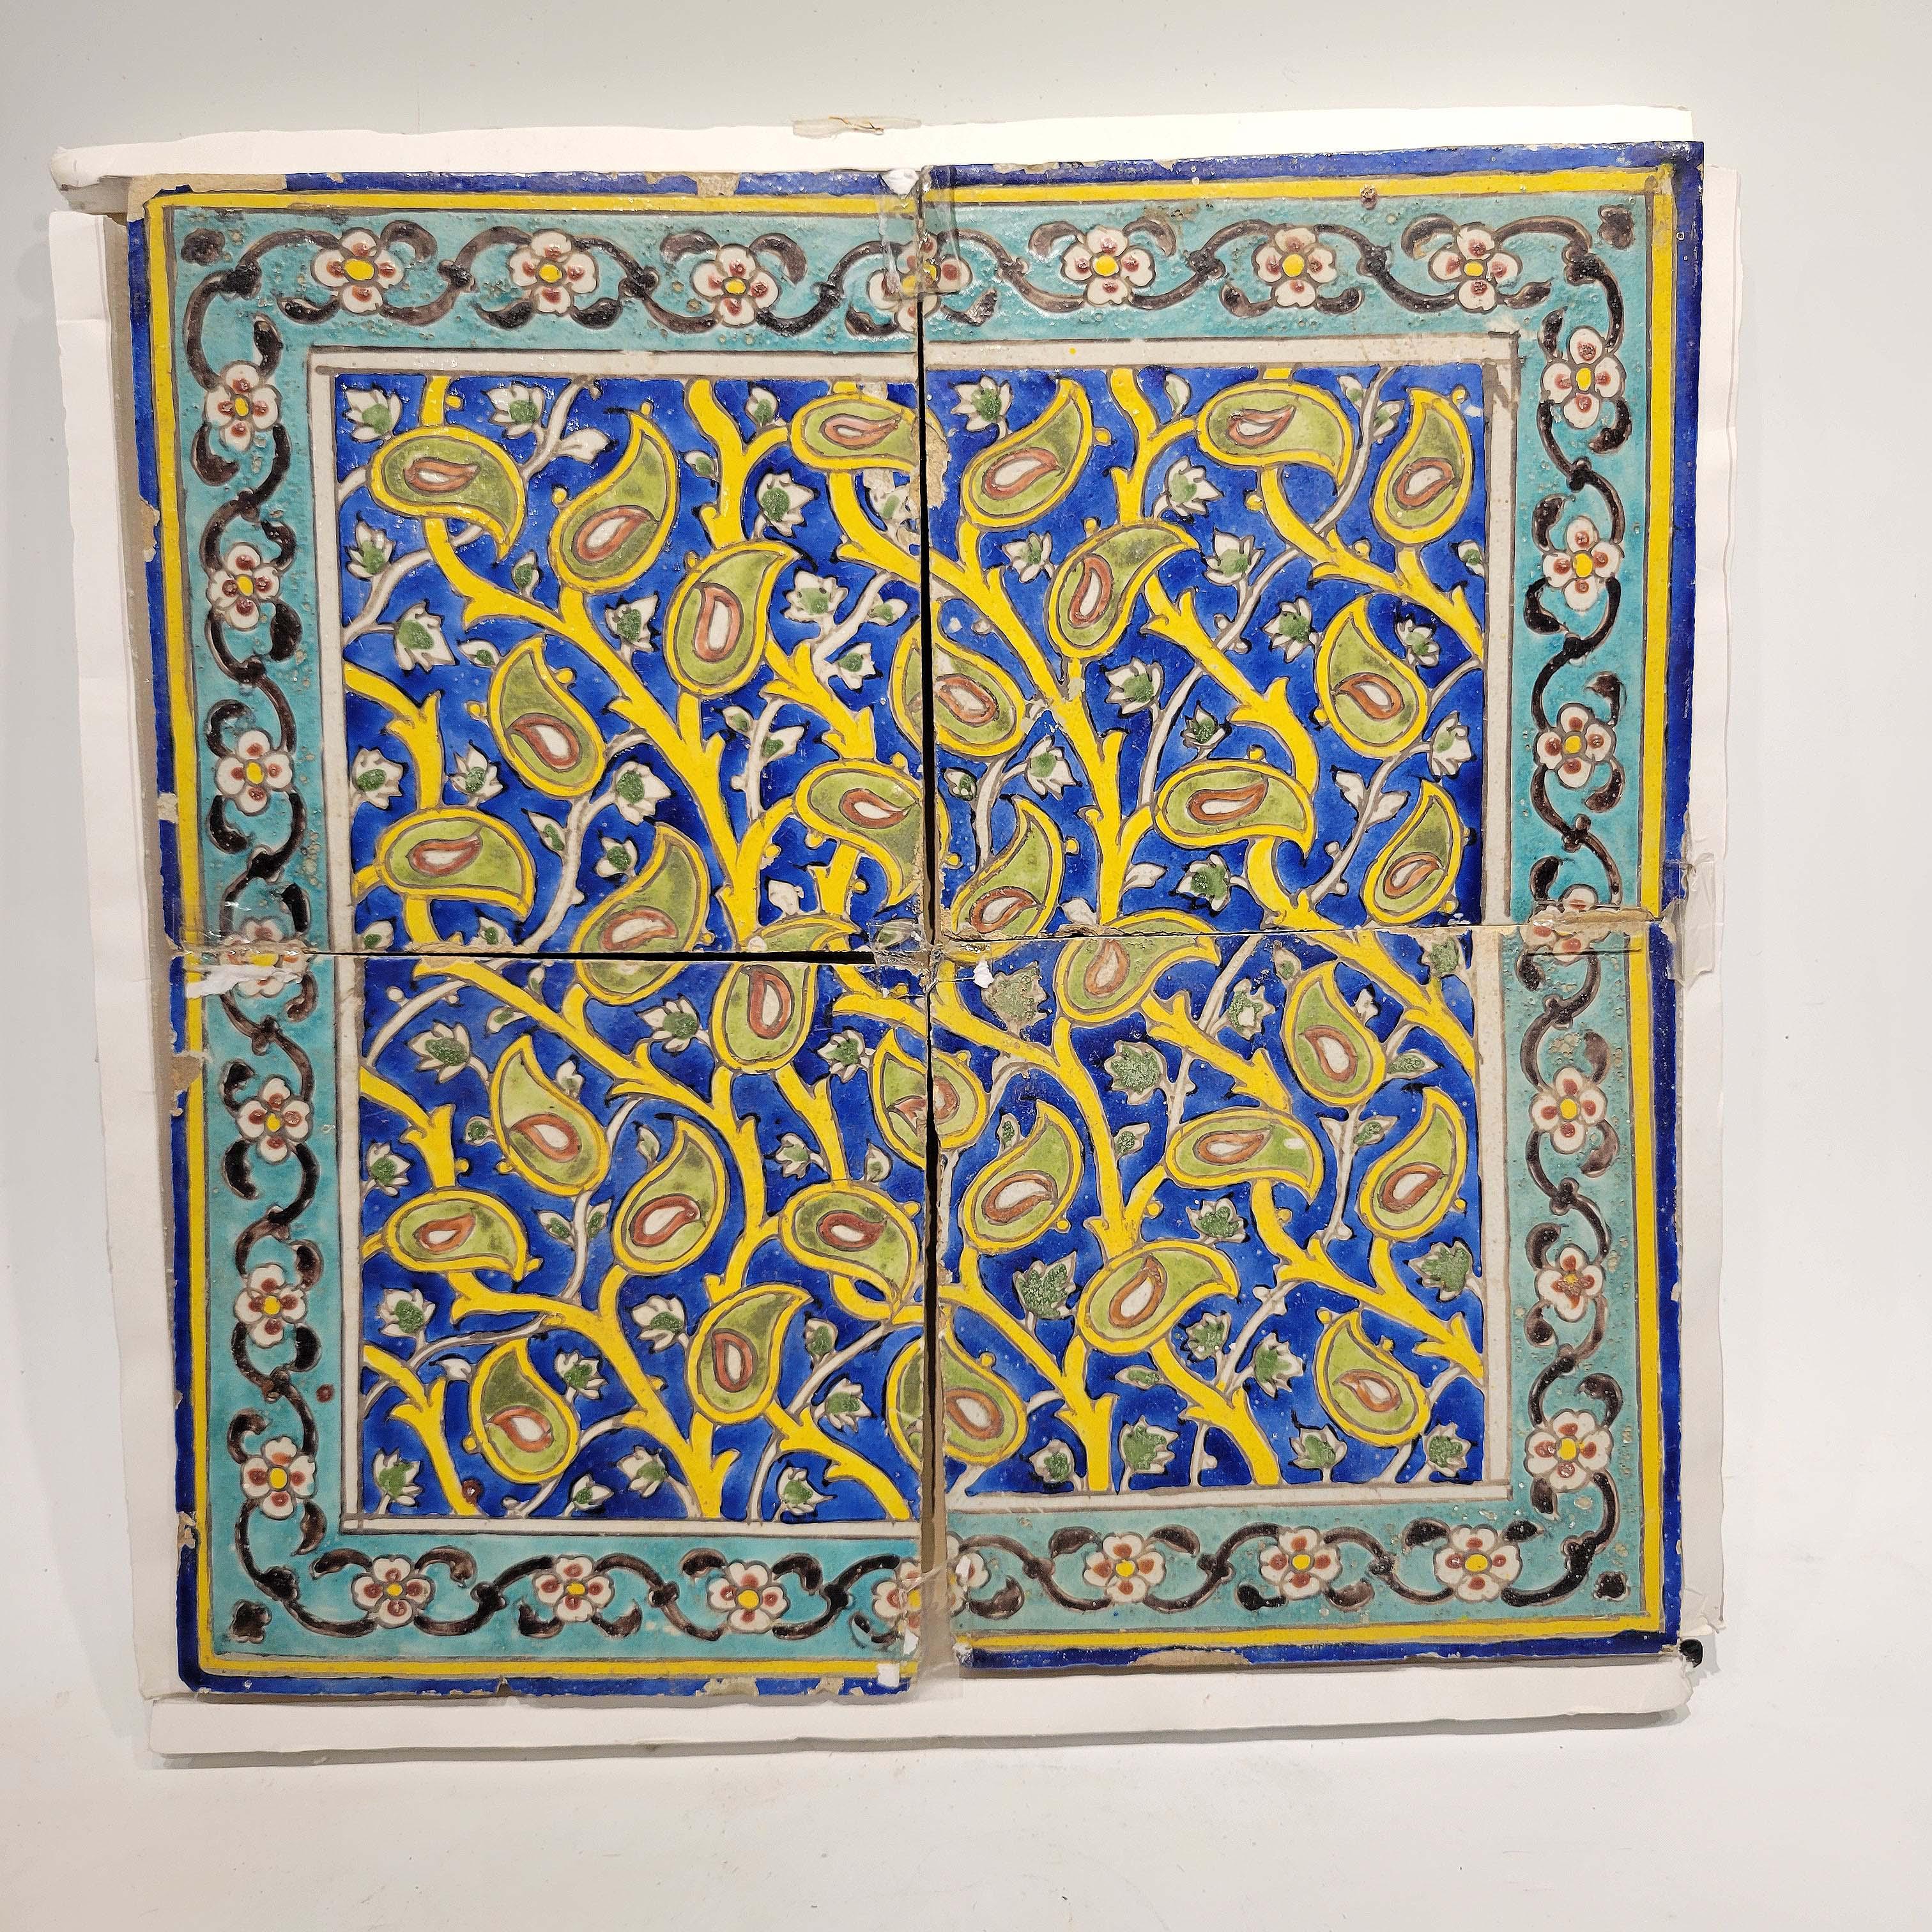 A panel of four late Safavid or Zand cuerda seca tiles, probably Isfahan, late 17th or early 18th century.
The set of tiles are matched to form a wonderful floral design in vibrant colors of yellow, turquoise, green, cobalt and rust.
Minor chips